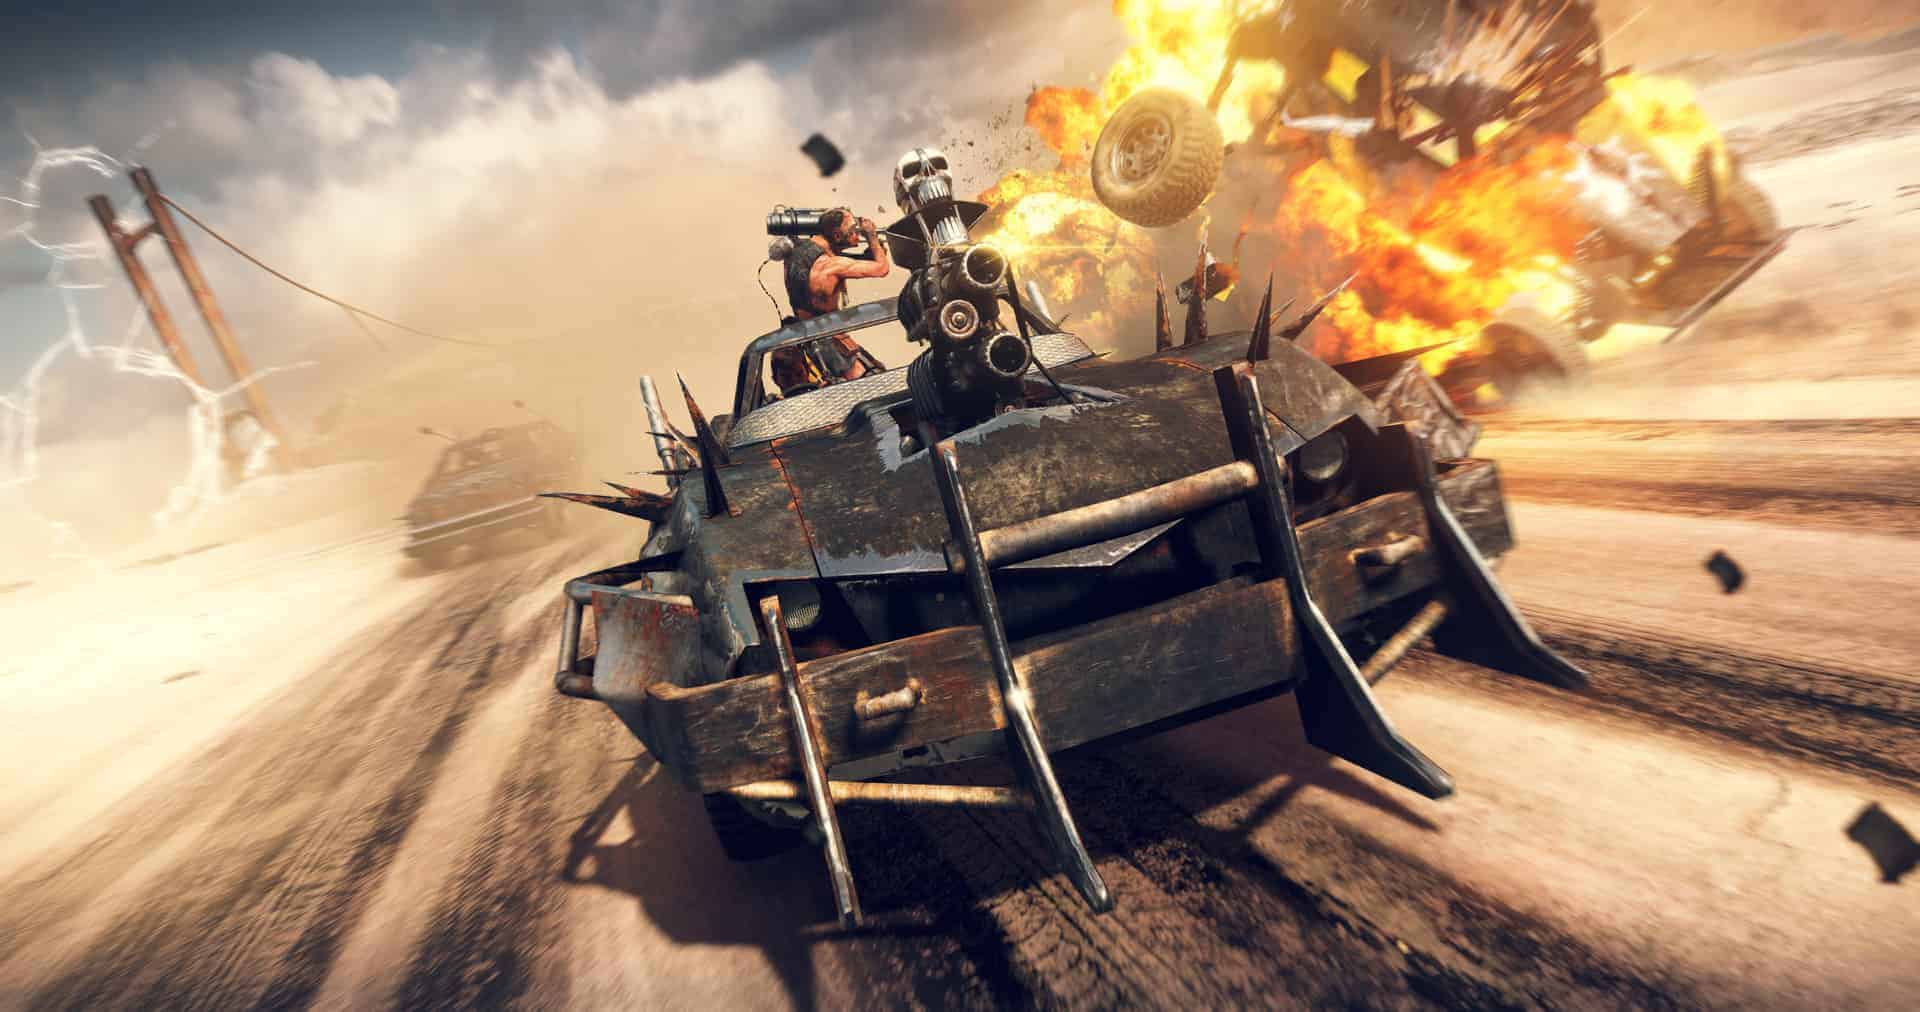 Mad max pc game free. download full version